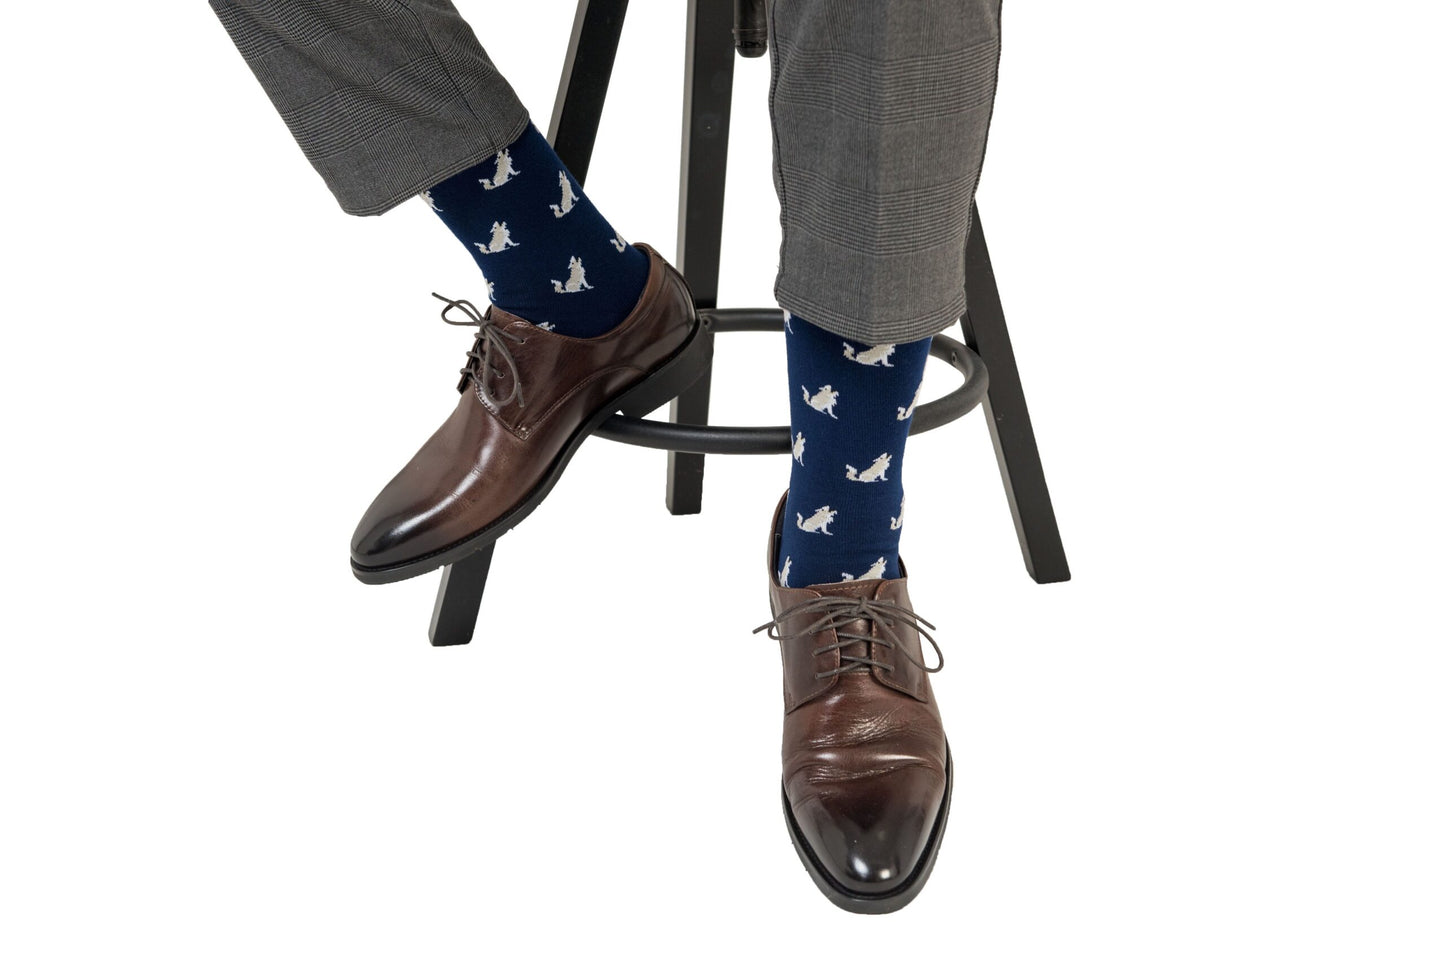 A person, set to lead the pack with every step, wearing stylish brown shoes and Wolf Socks with white bird patterns seated on a black stool.